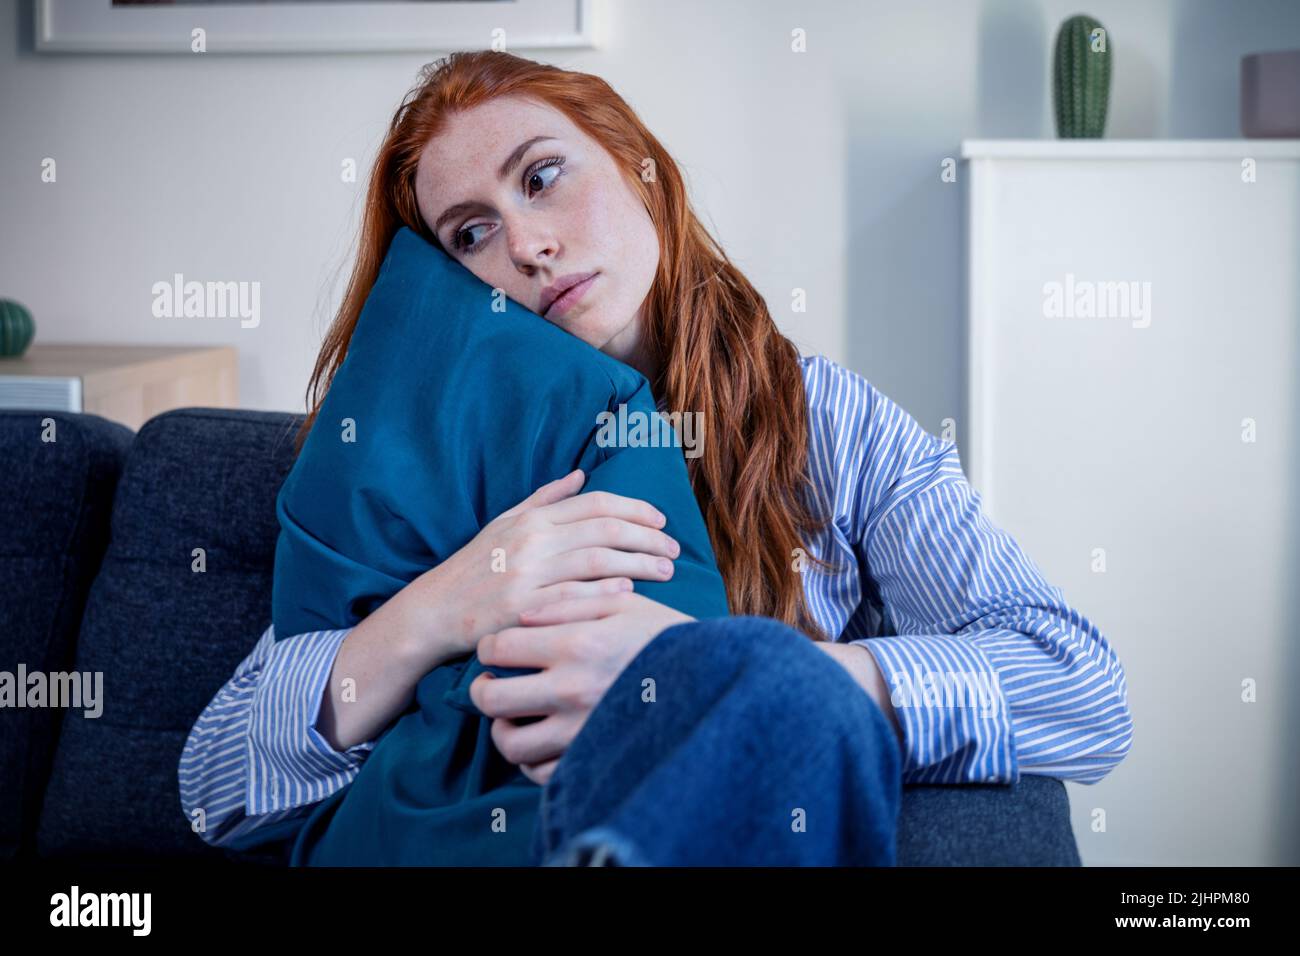 Lonely young woman feeling alone and negative emotion Stock Photo